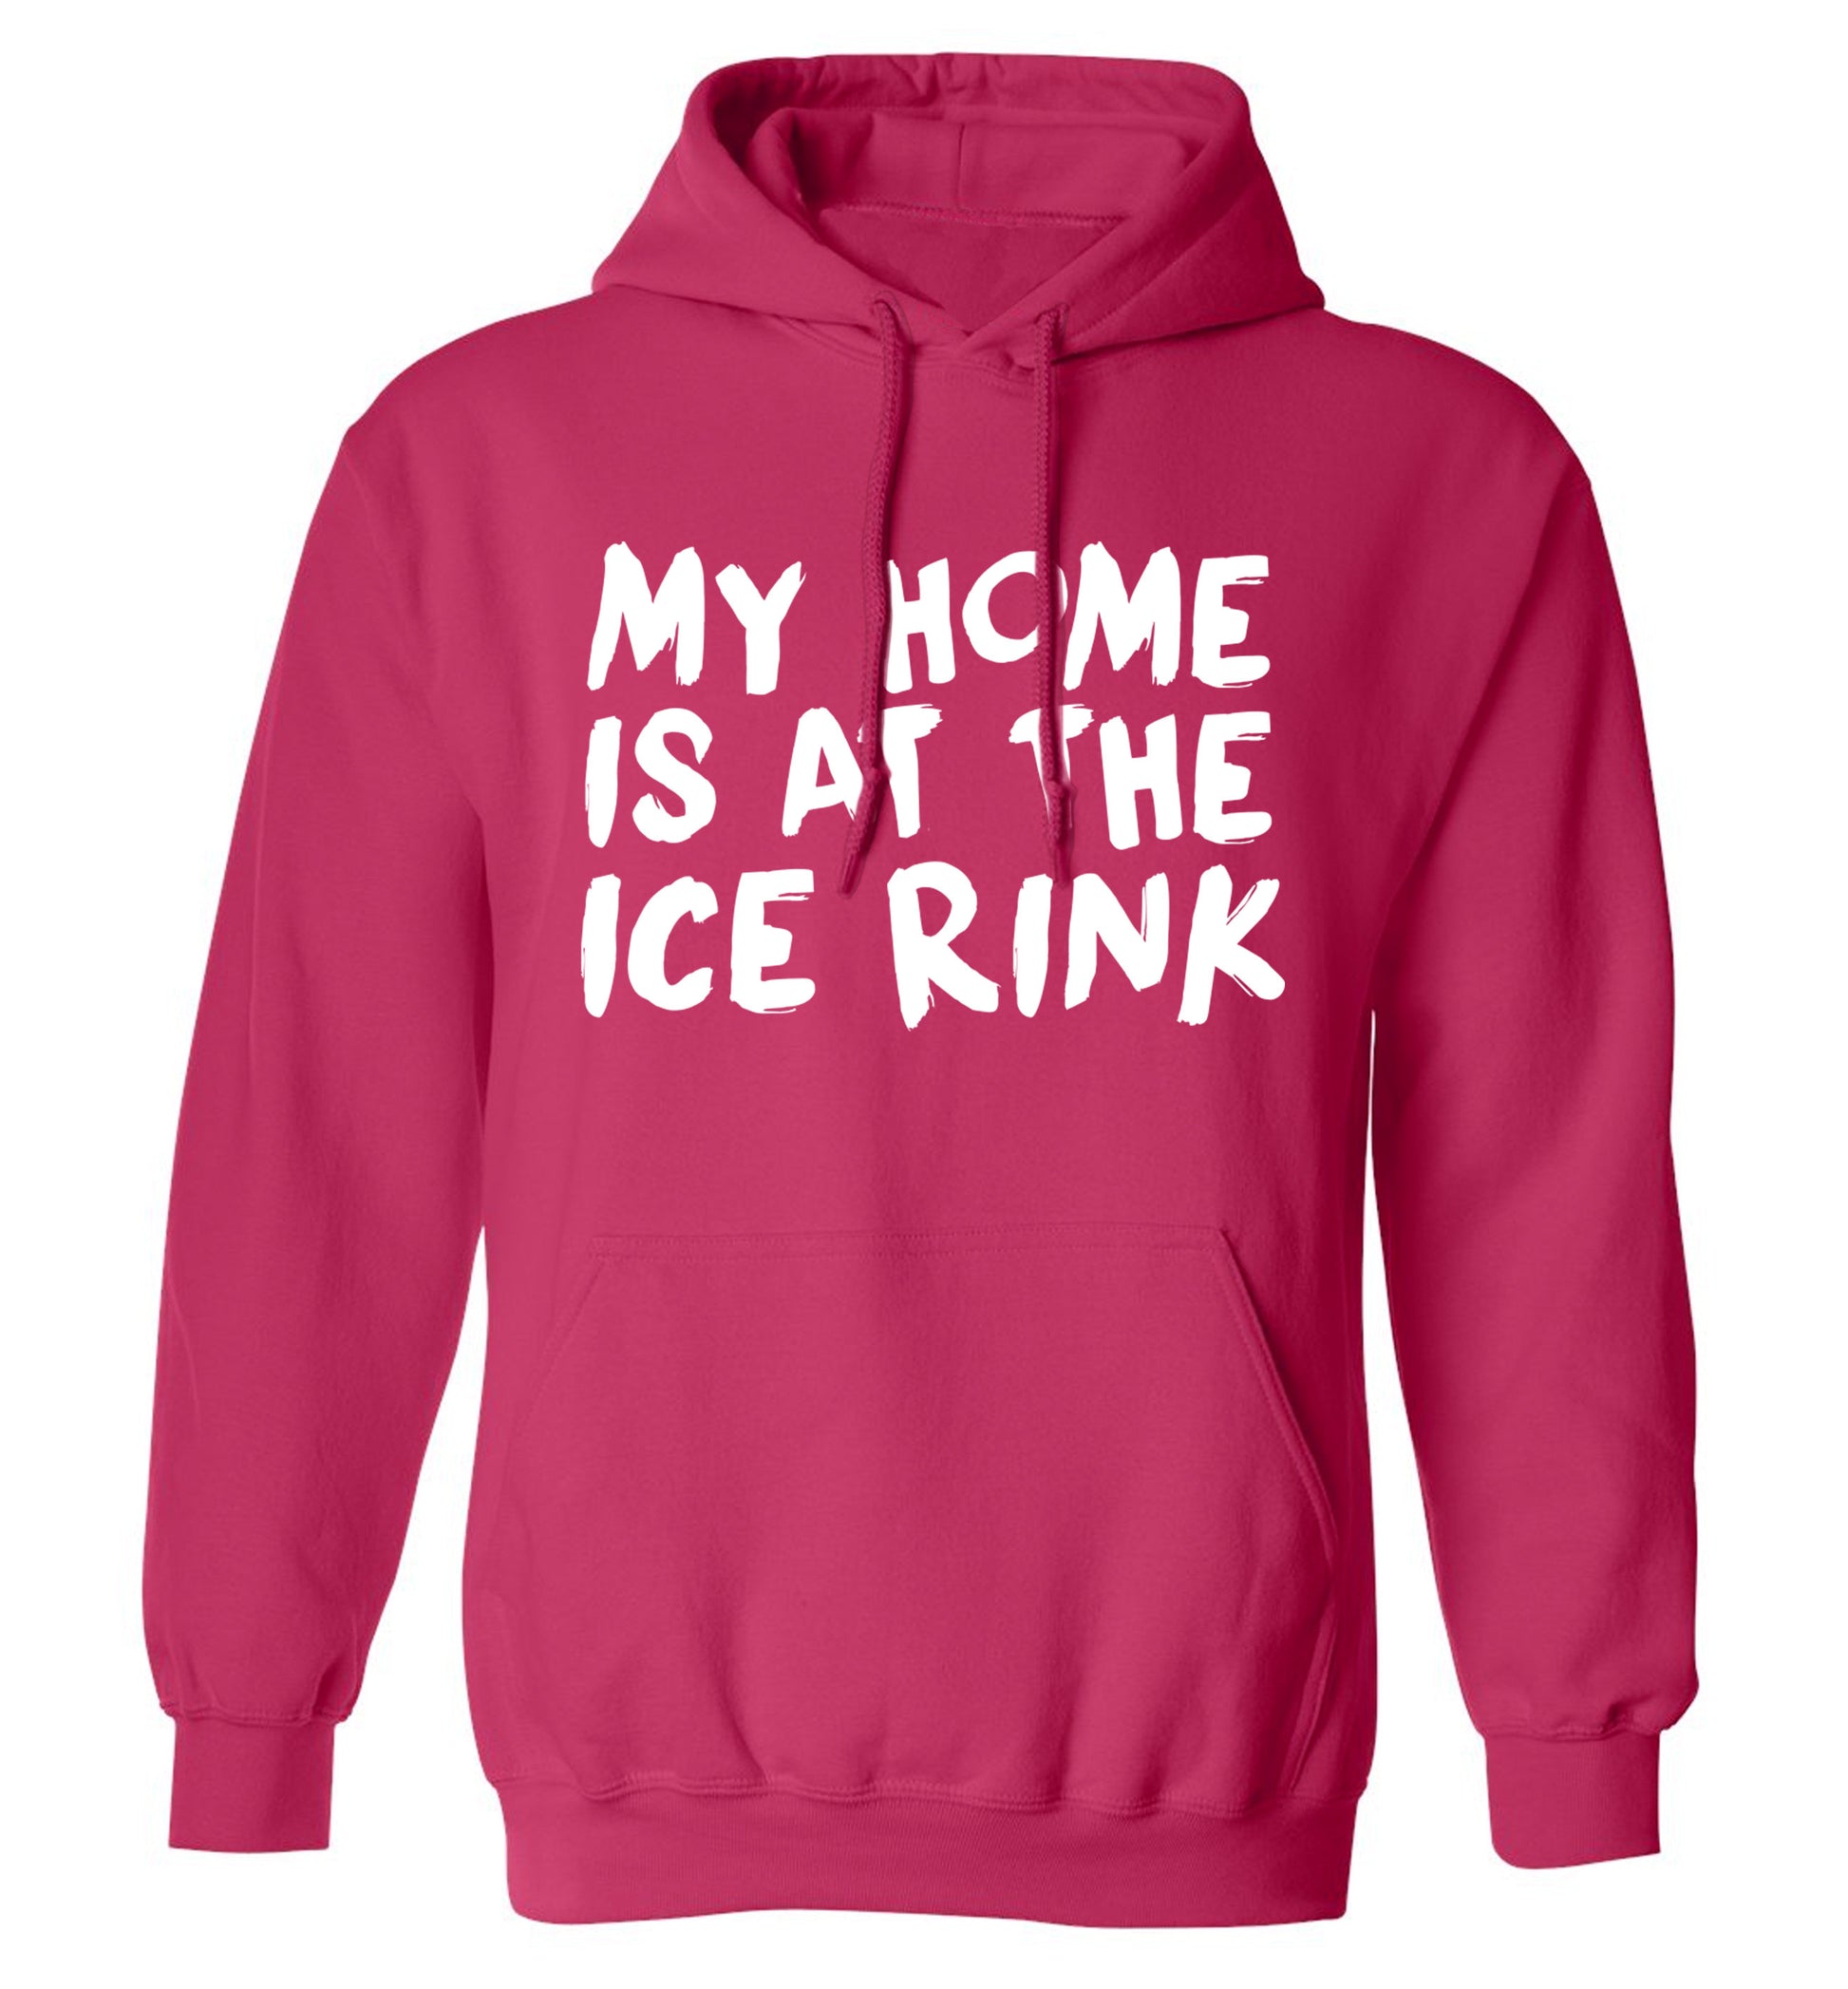 My home is at the ice rink adults unisex pink hoodie 2XL